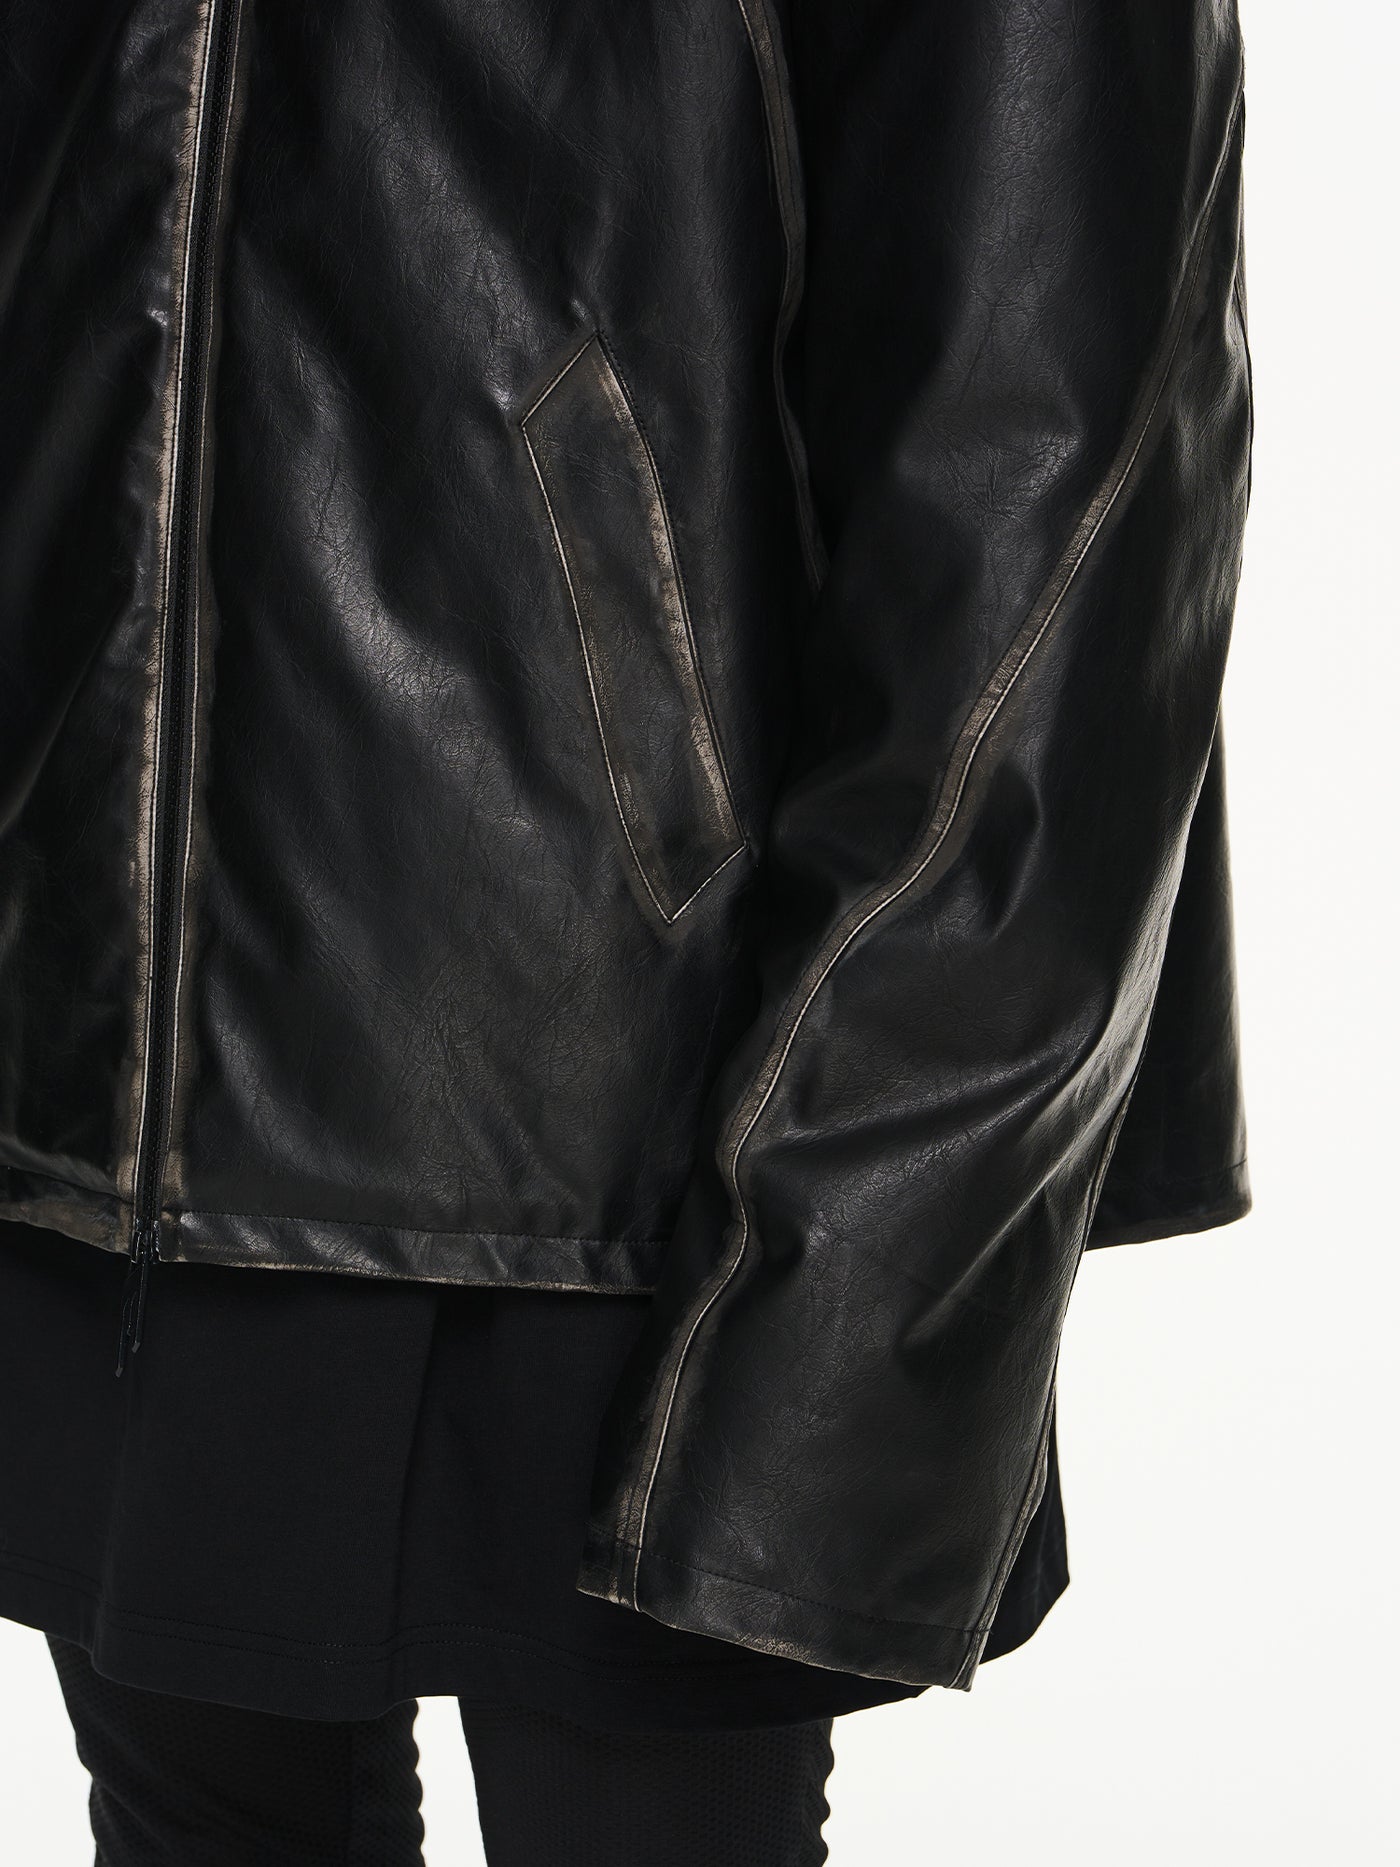 BLIND NO PLAN Distressed Stitching Leather Jacket